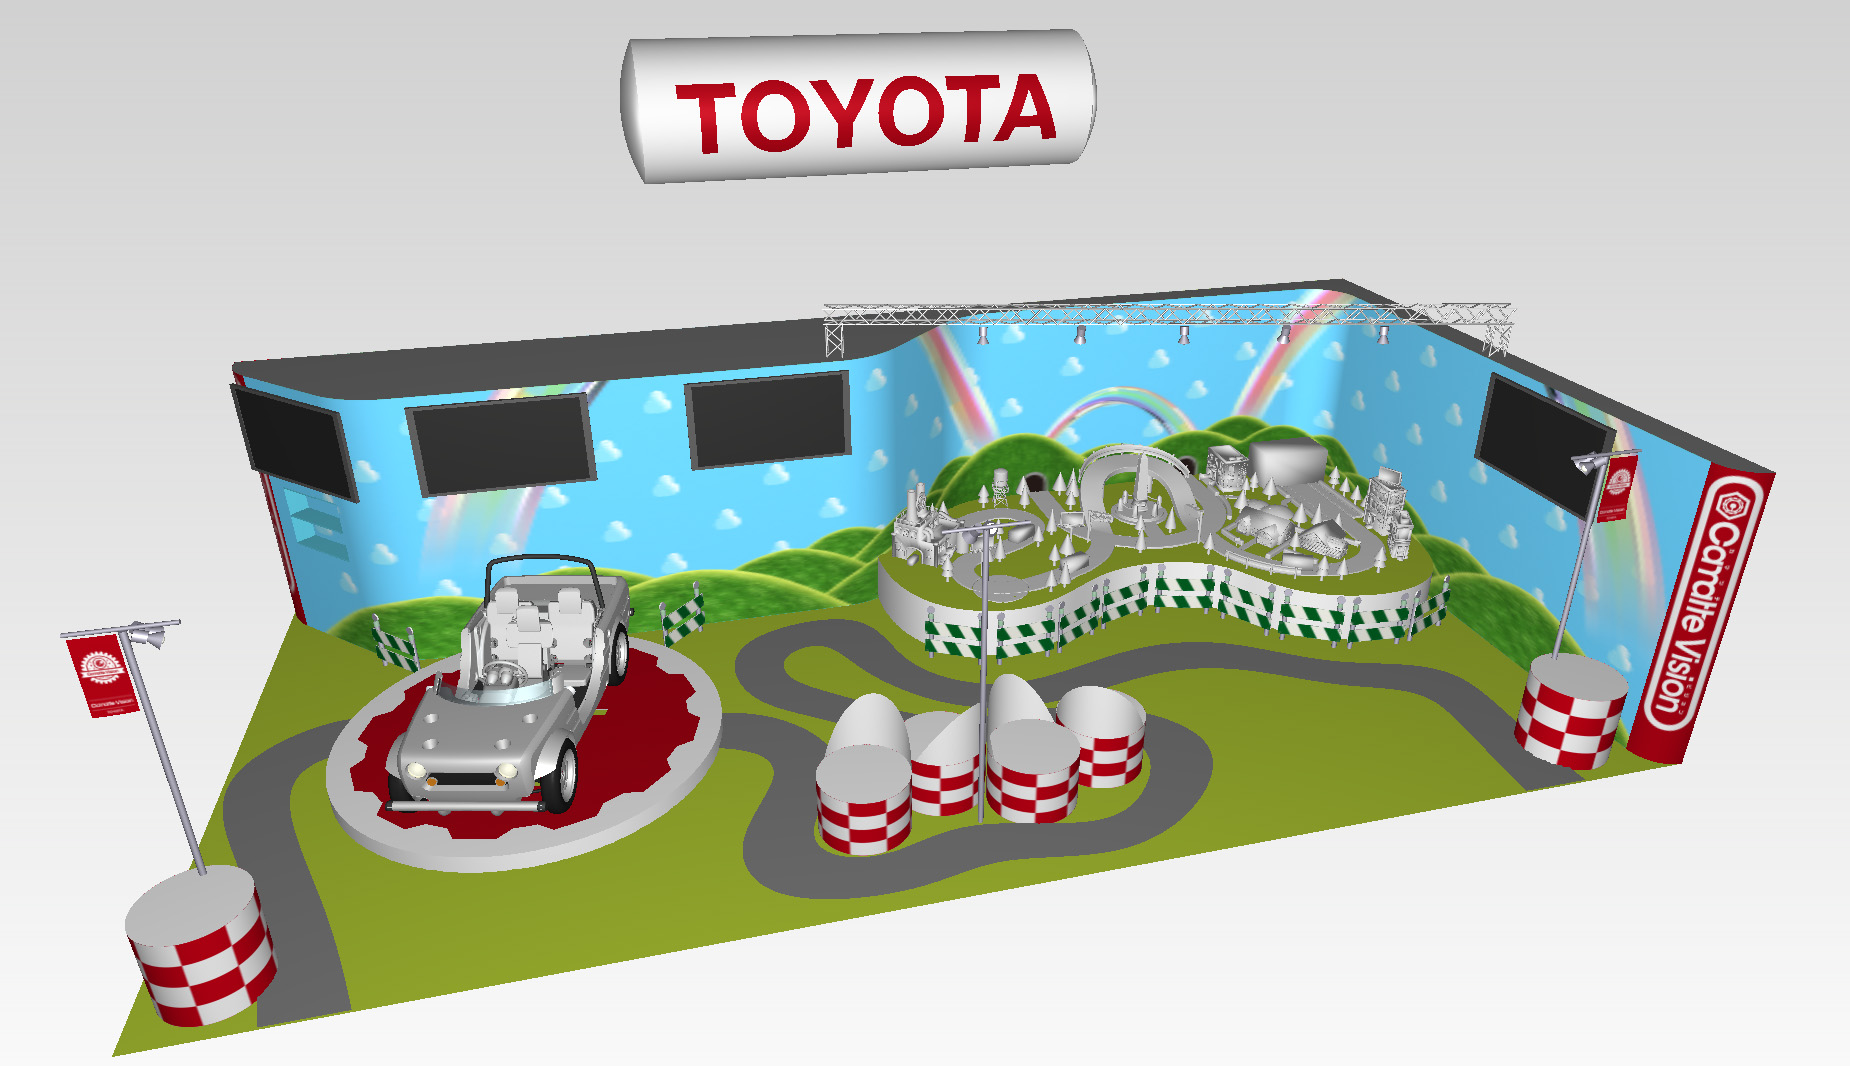 Toyota's booth at the International Tokyo Toy Show